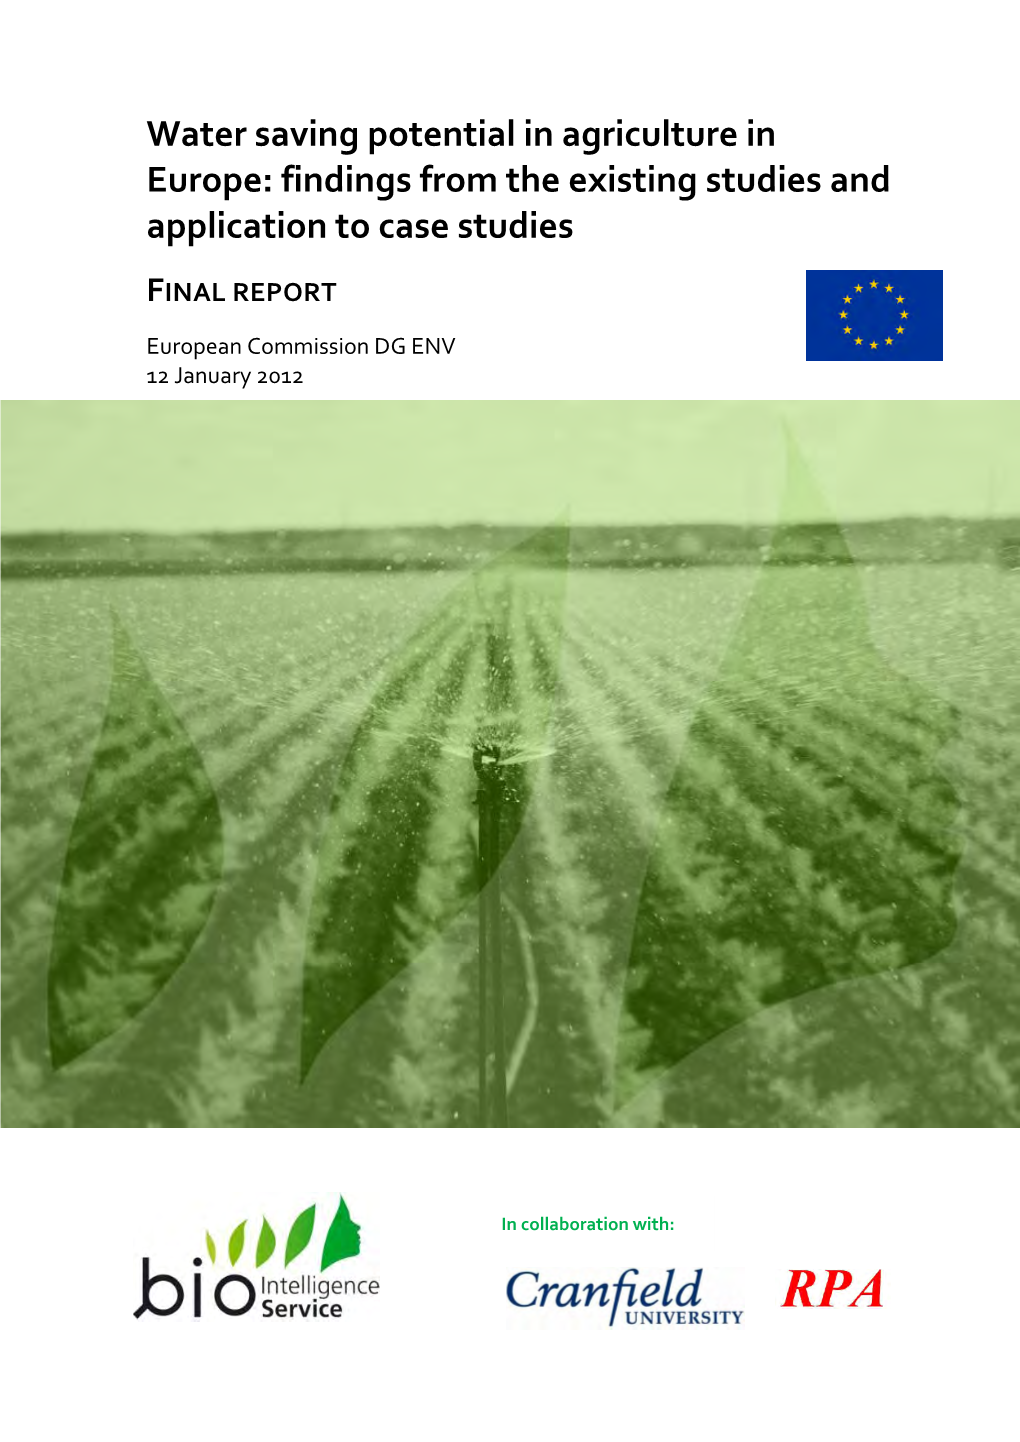 Water Saving Potential in Agriculture in Europe: Findings from the Existing Studies and Application to Case Studies